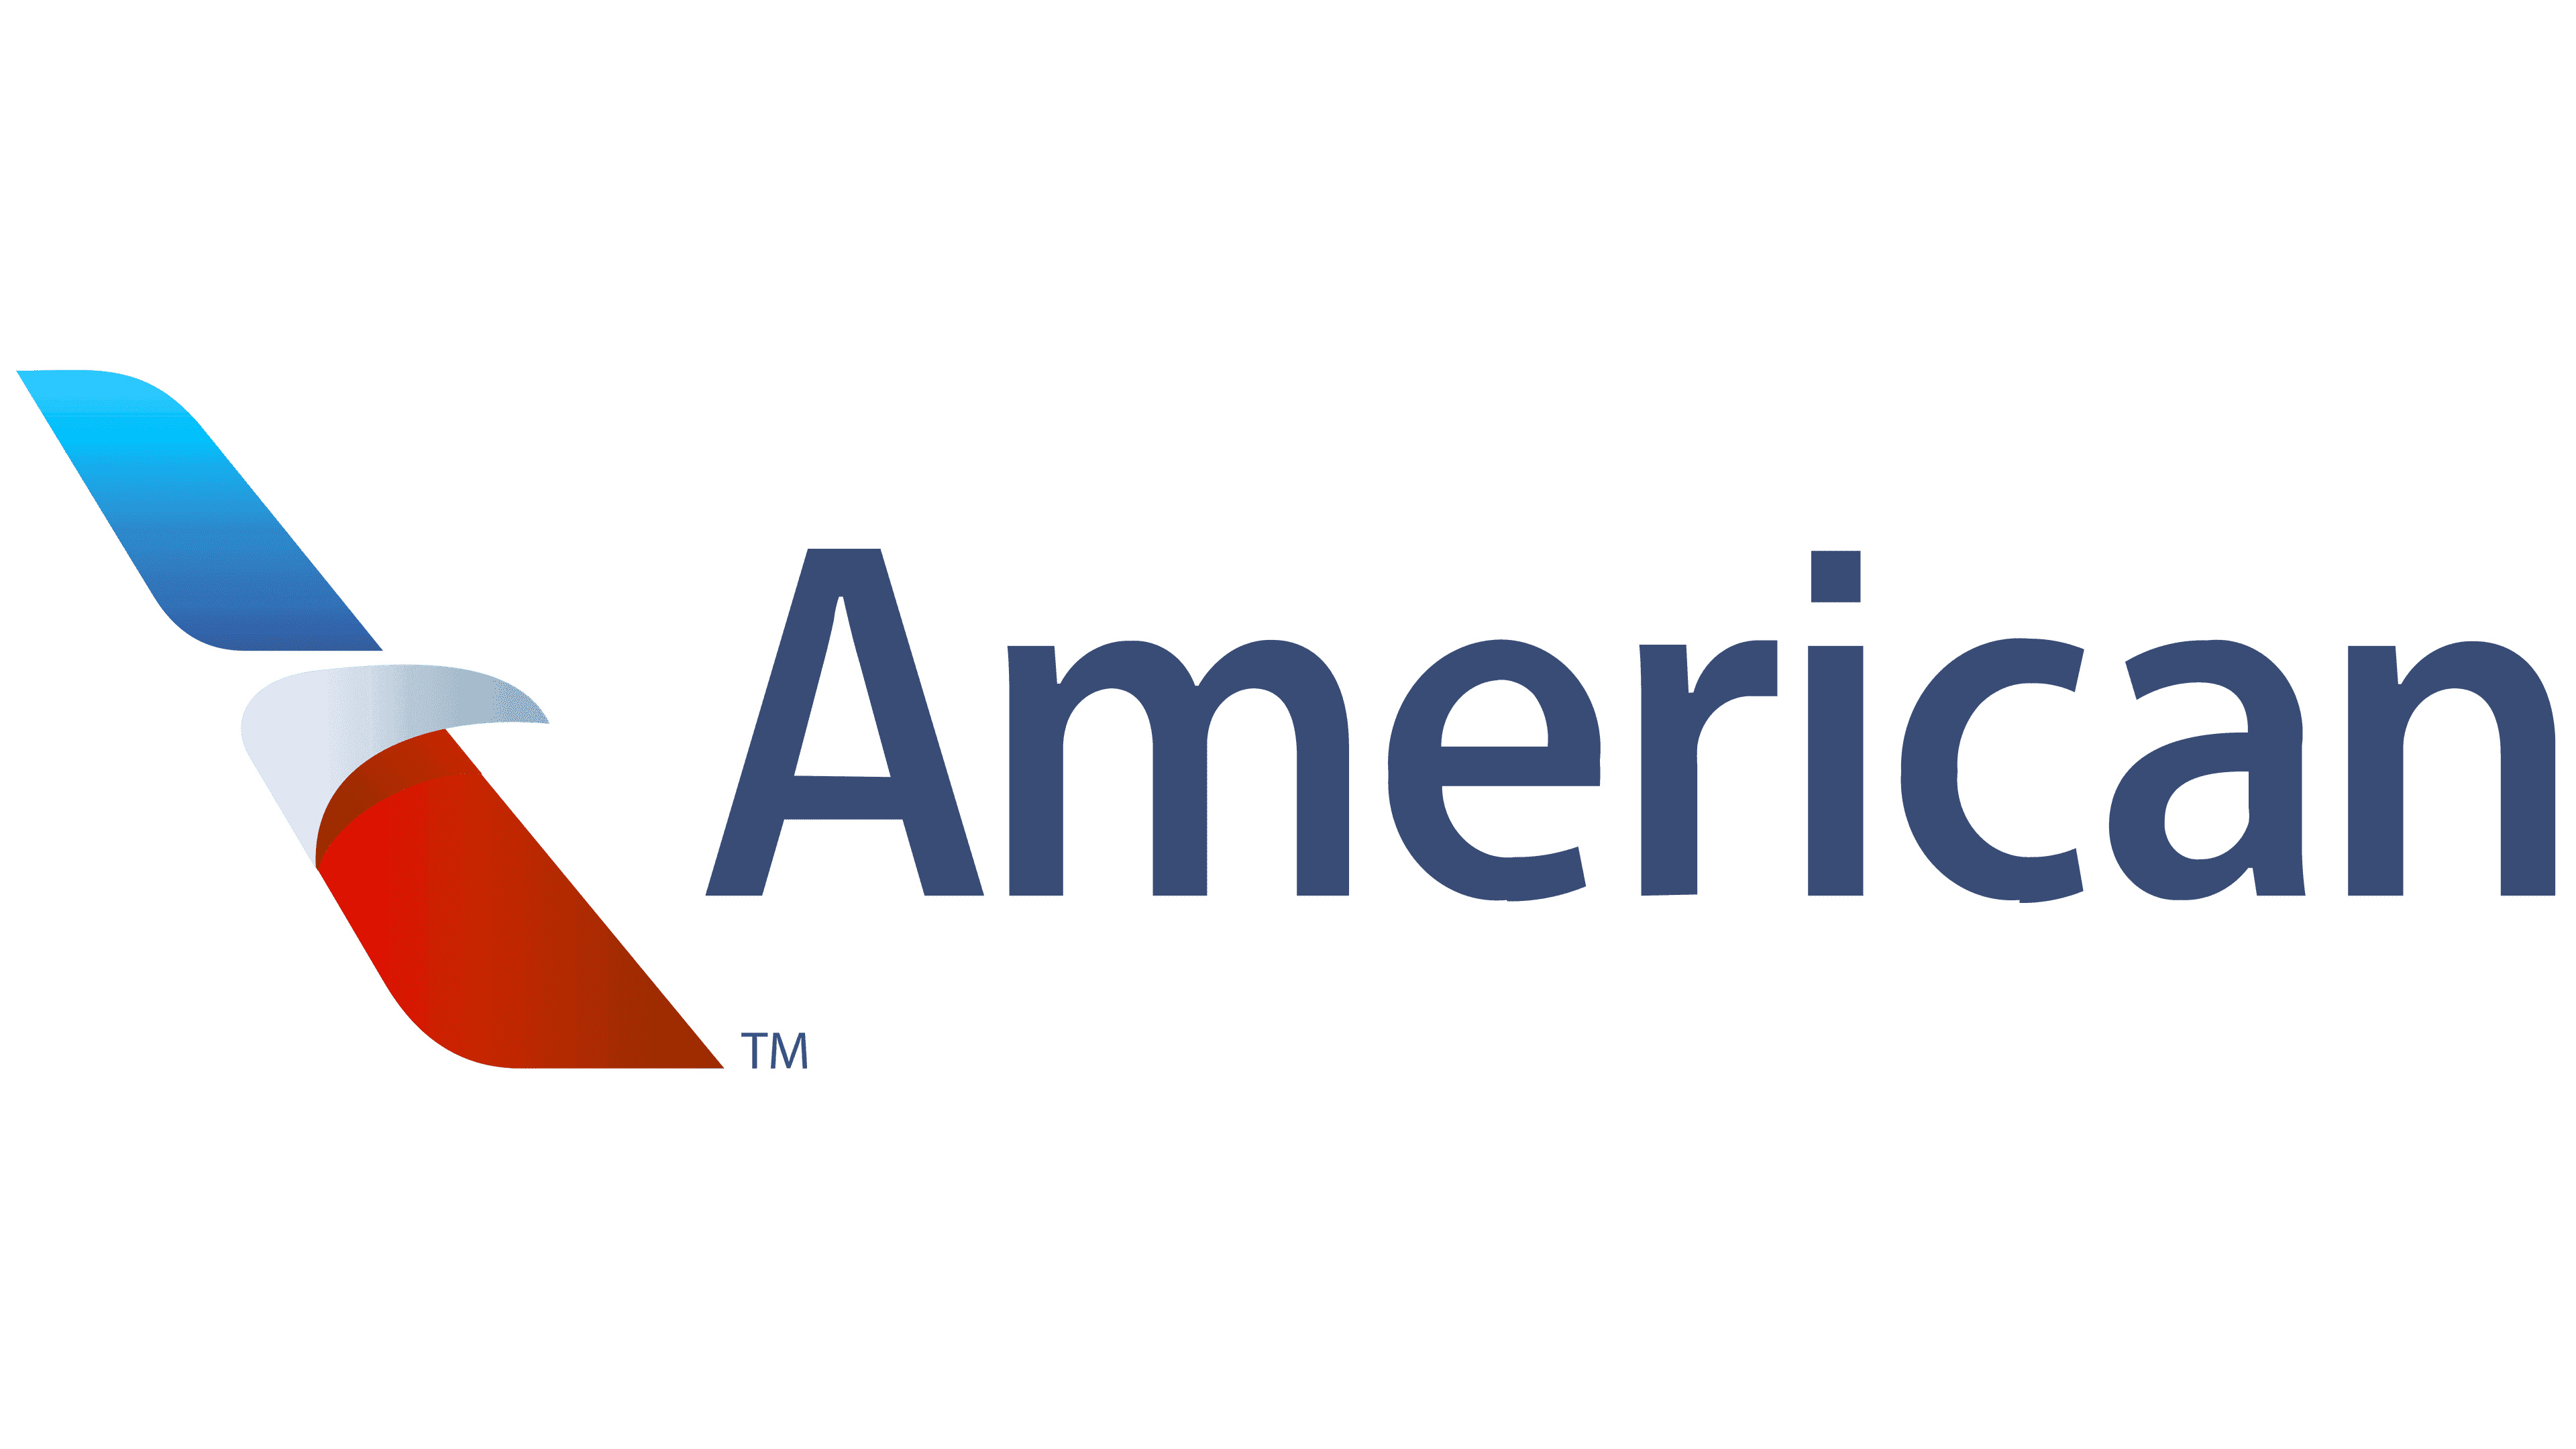 american airlines logos history